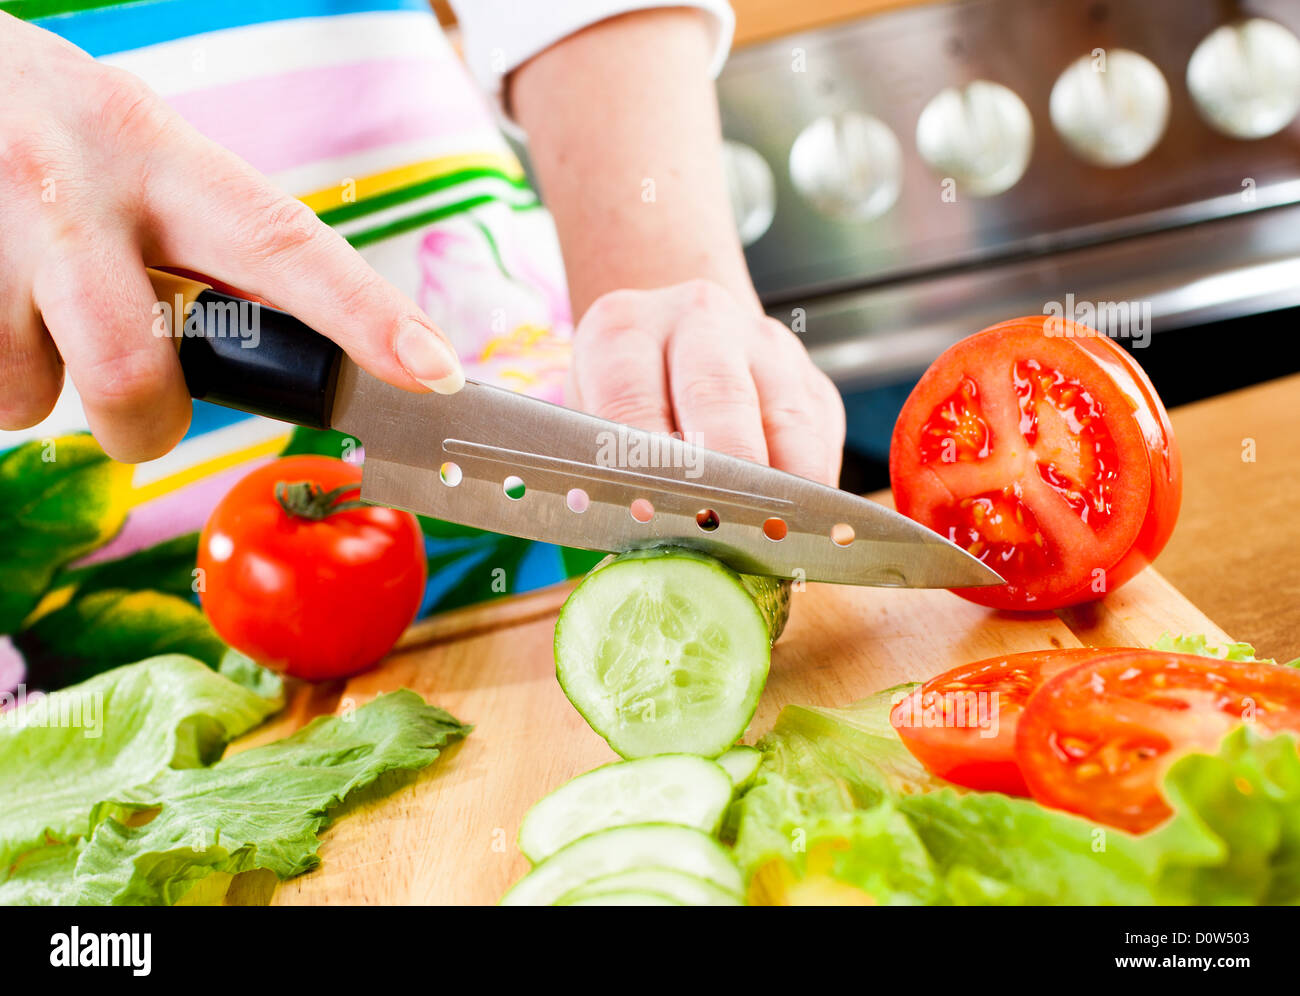 Woman's hands cutting vegetables Stock Photo